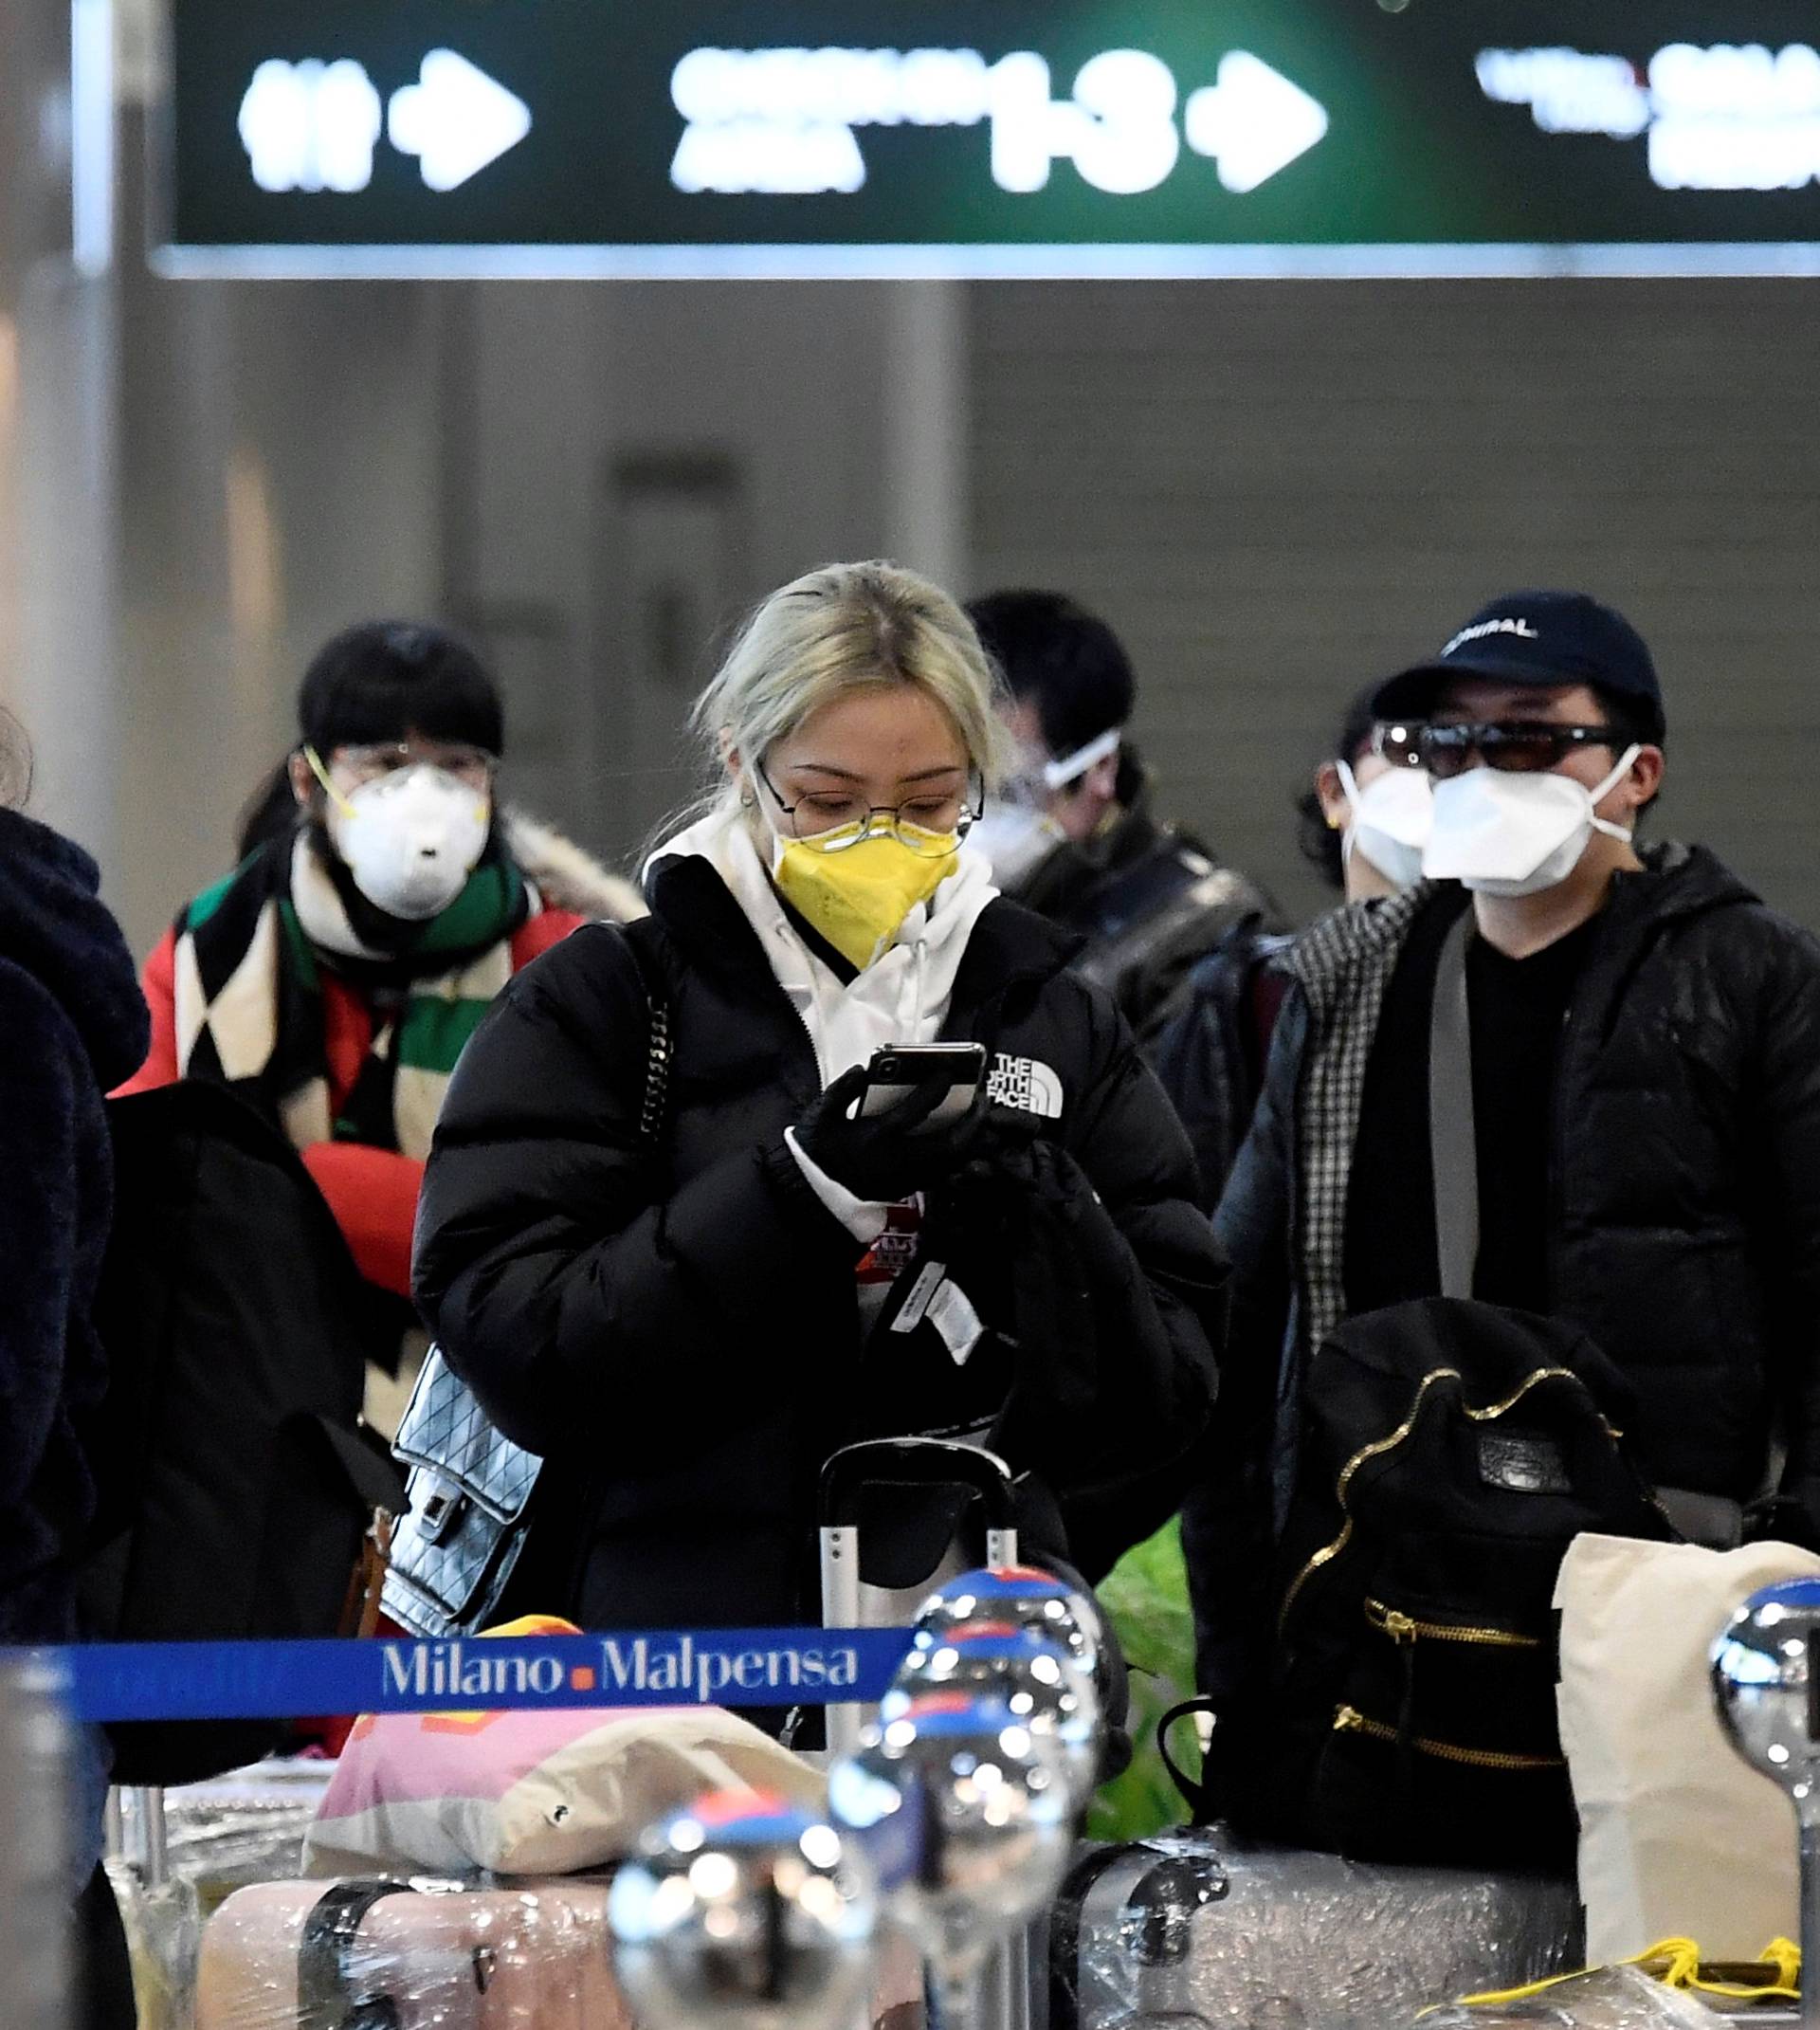 People wearing protective masks are seen at Malpensa airport near Milan